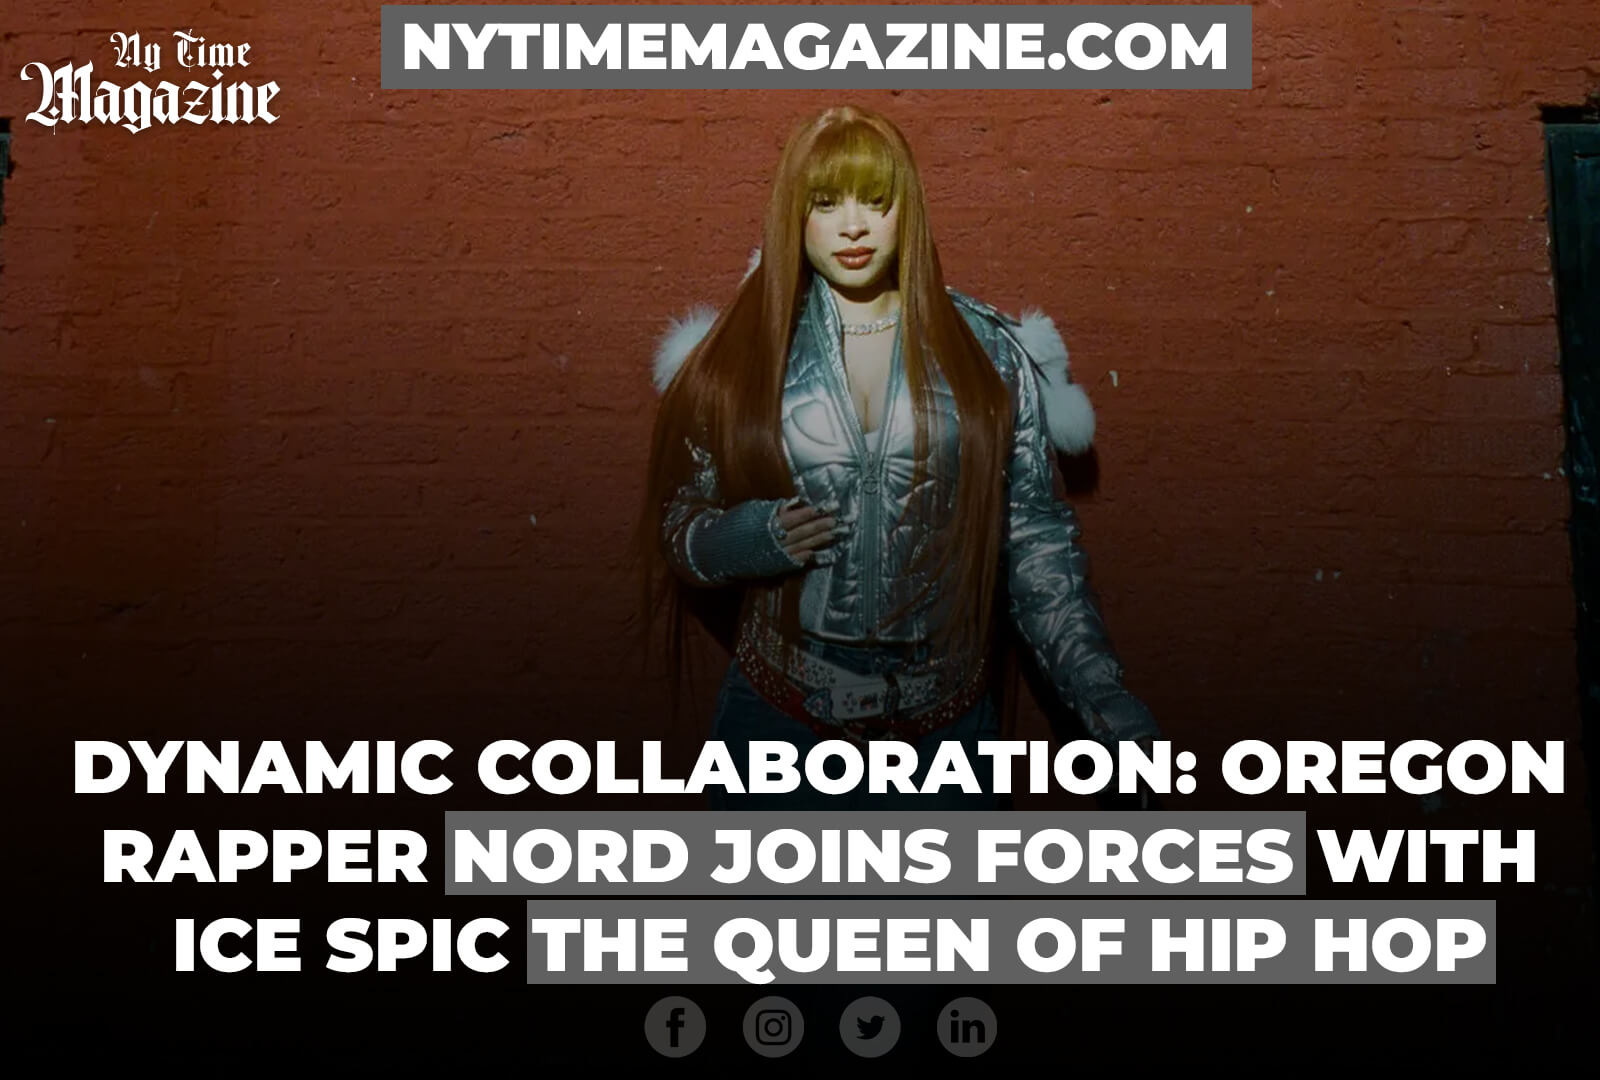 DYNAMIC COLLABORATION: OREGON RAPPER NORD JOINS FORCES WITH ICE SPICE, THE QUEEN OF HIP HOP